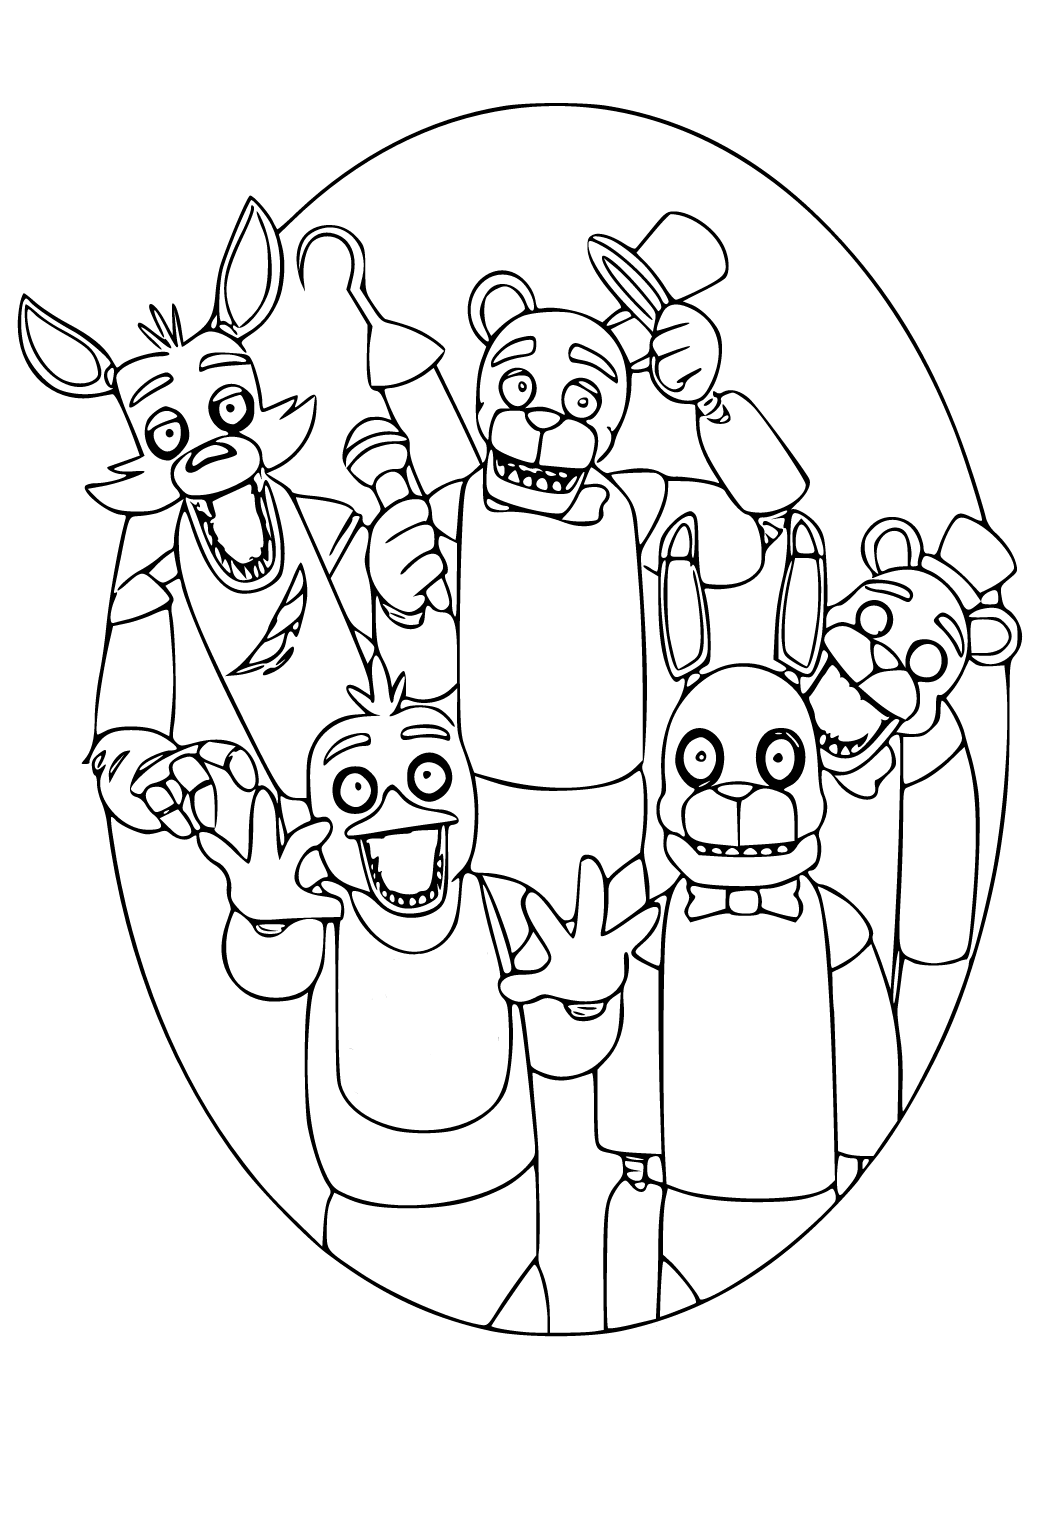 FNaF Freddy Portrait coloring page from Five Nights at Freddy's